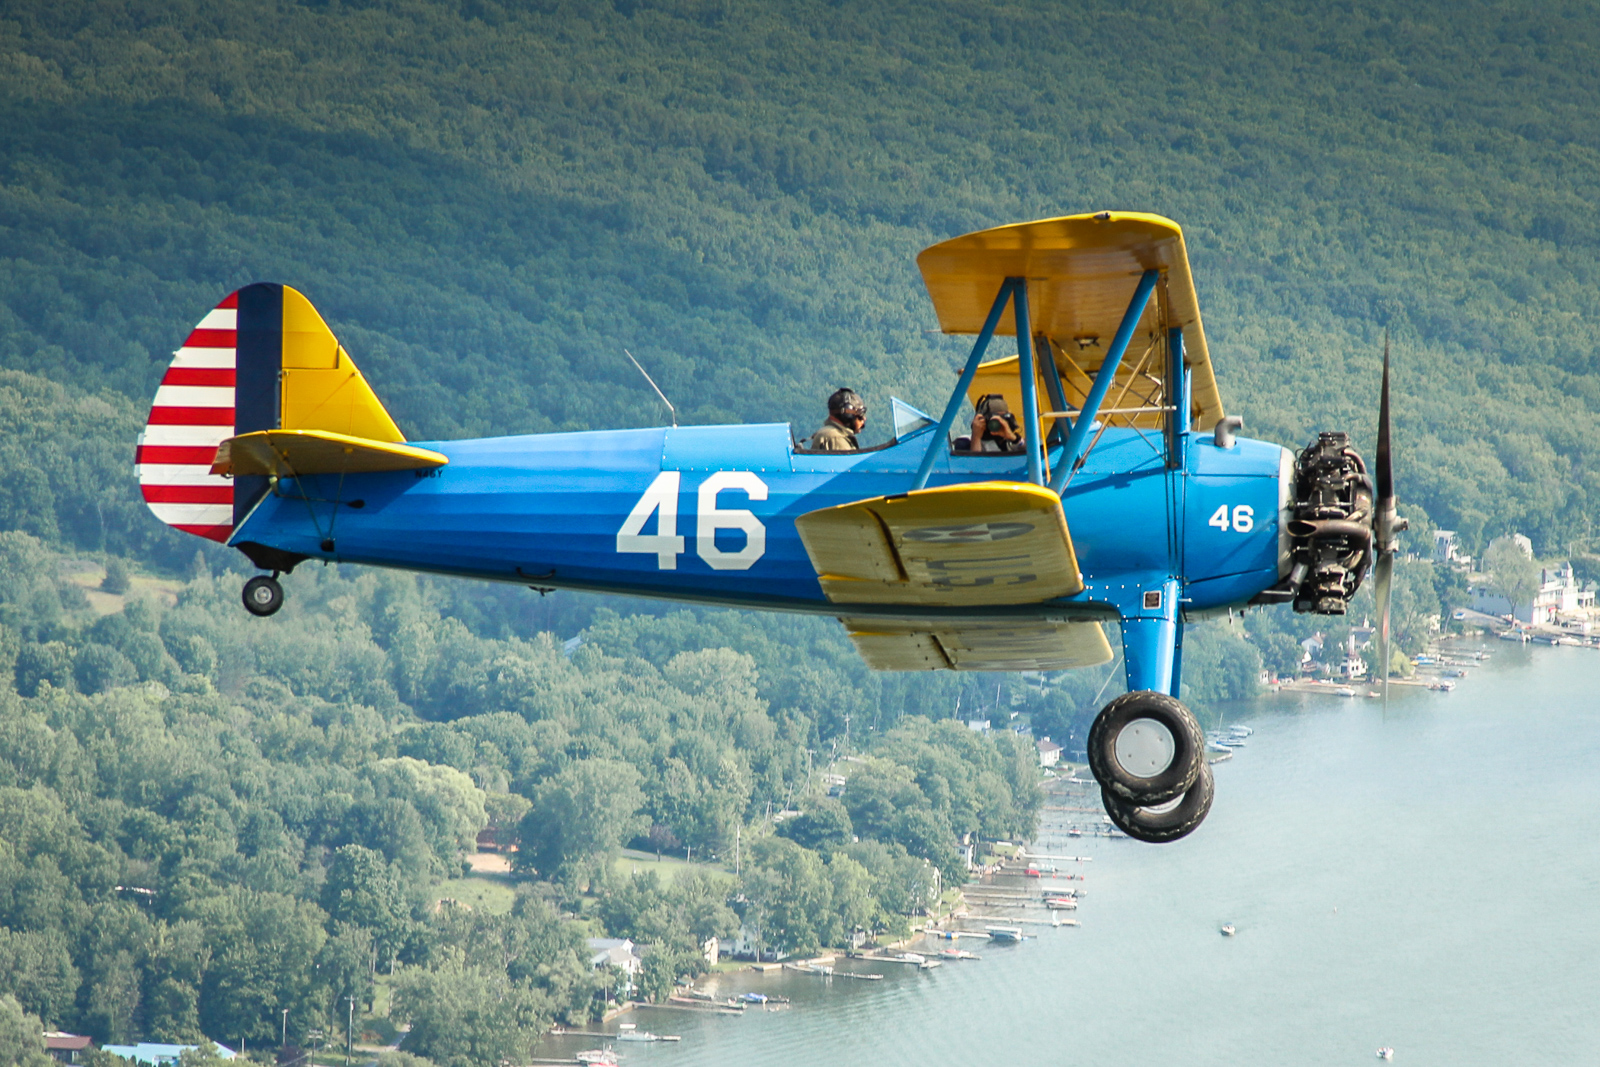 Stearman flown by Quentin Marty. (photo by Tom Pawlesh)